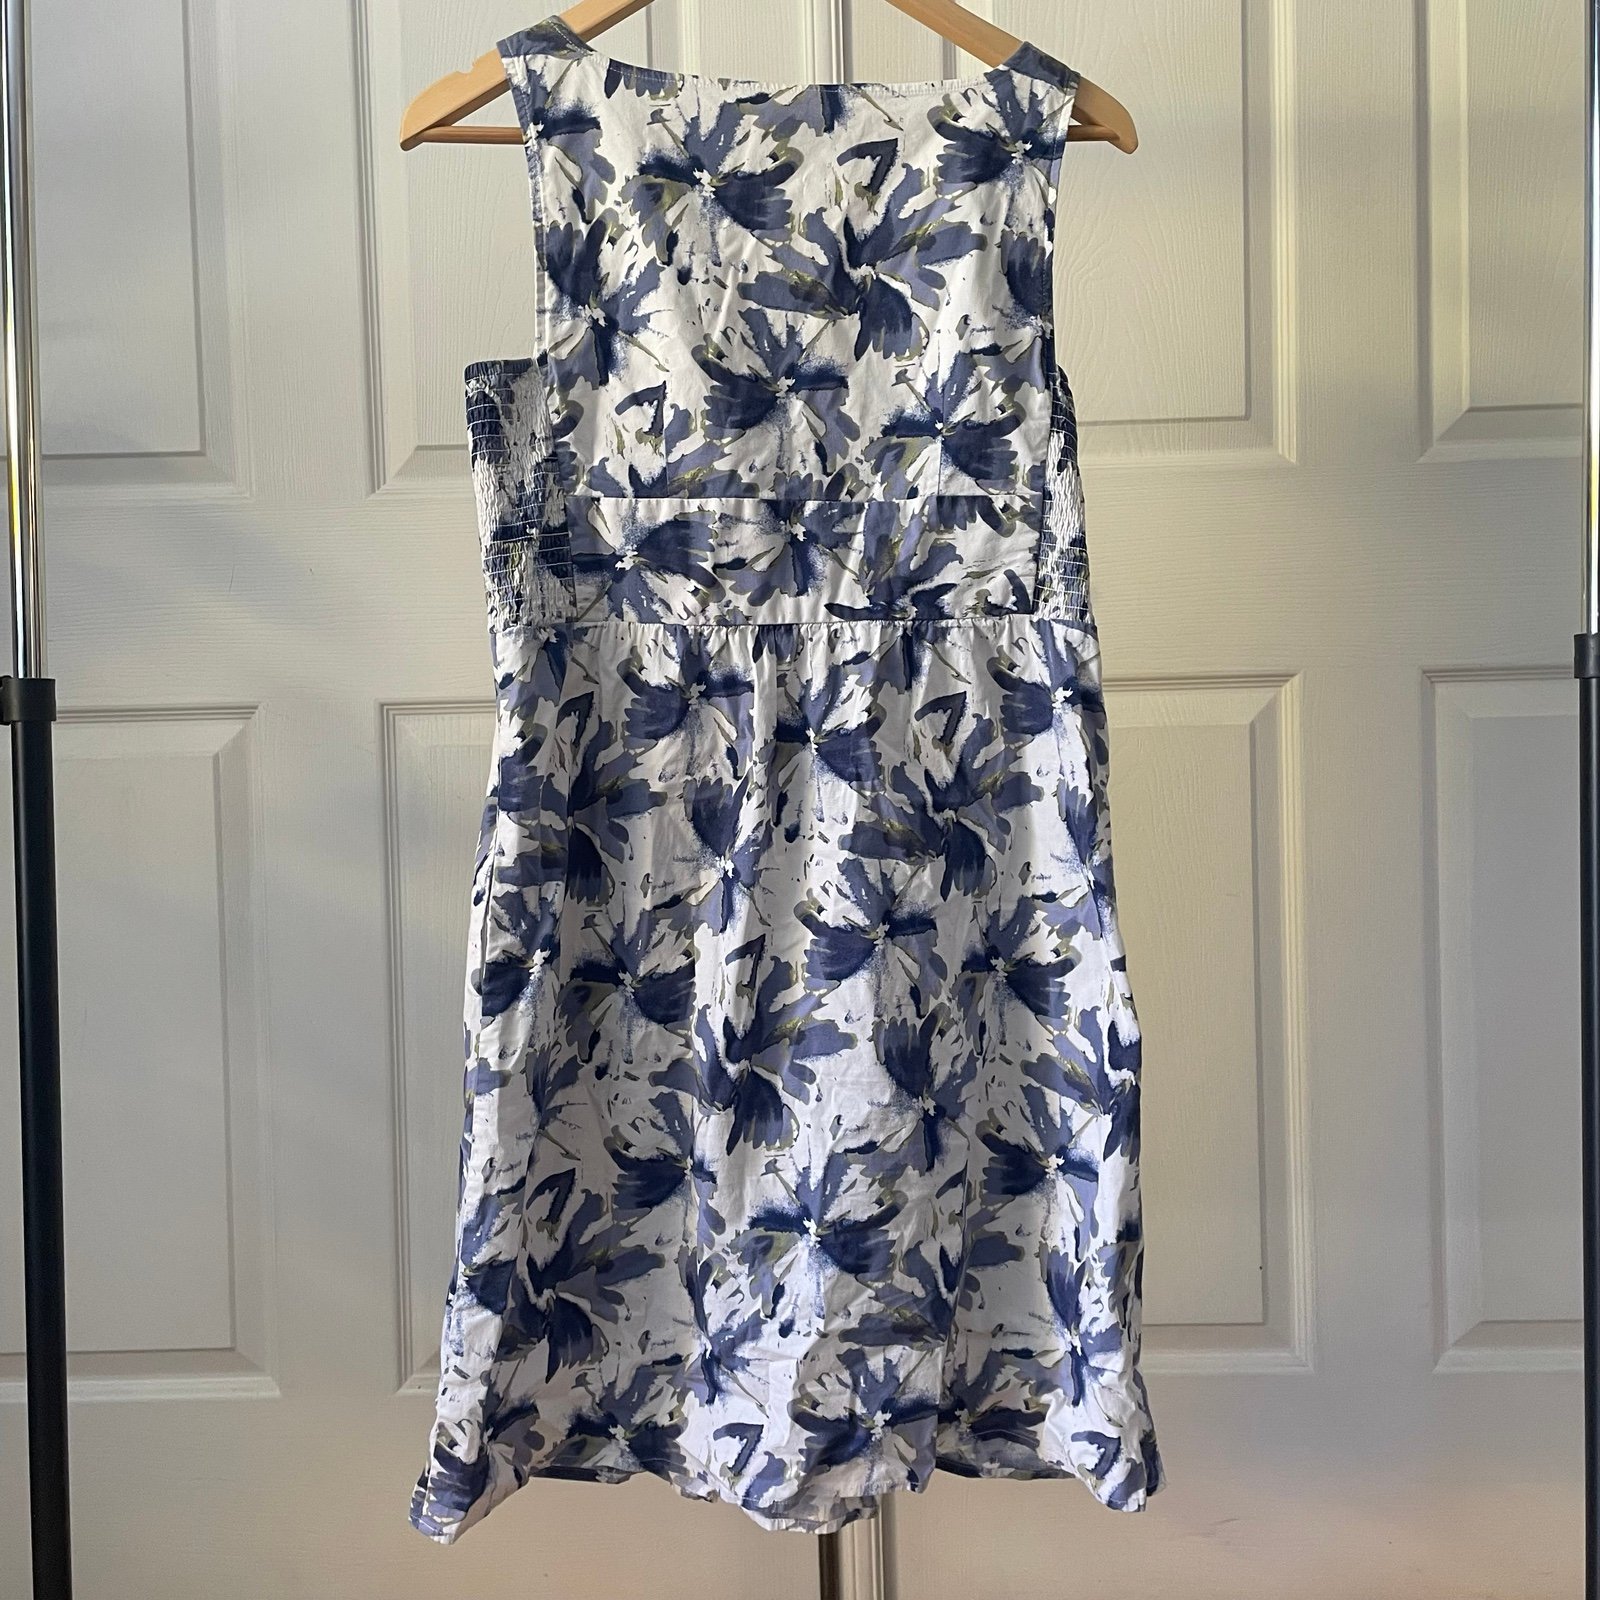 cheapest place to buy  Ann Taylor sundress MR99Rd3cy Outlet Store